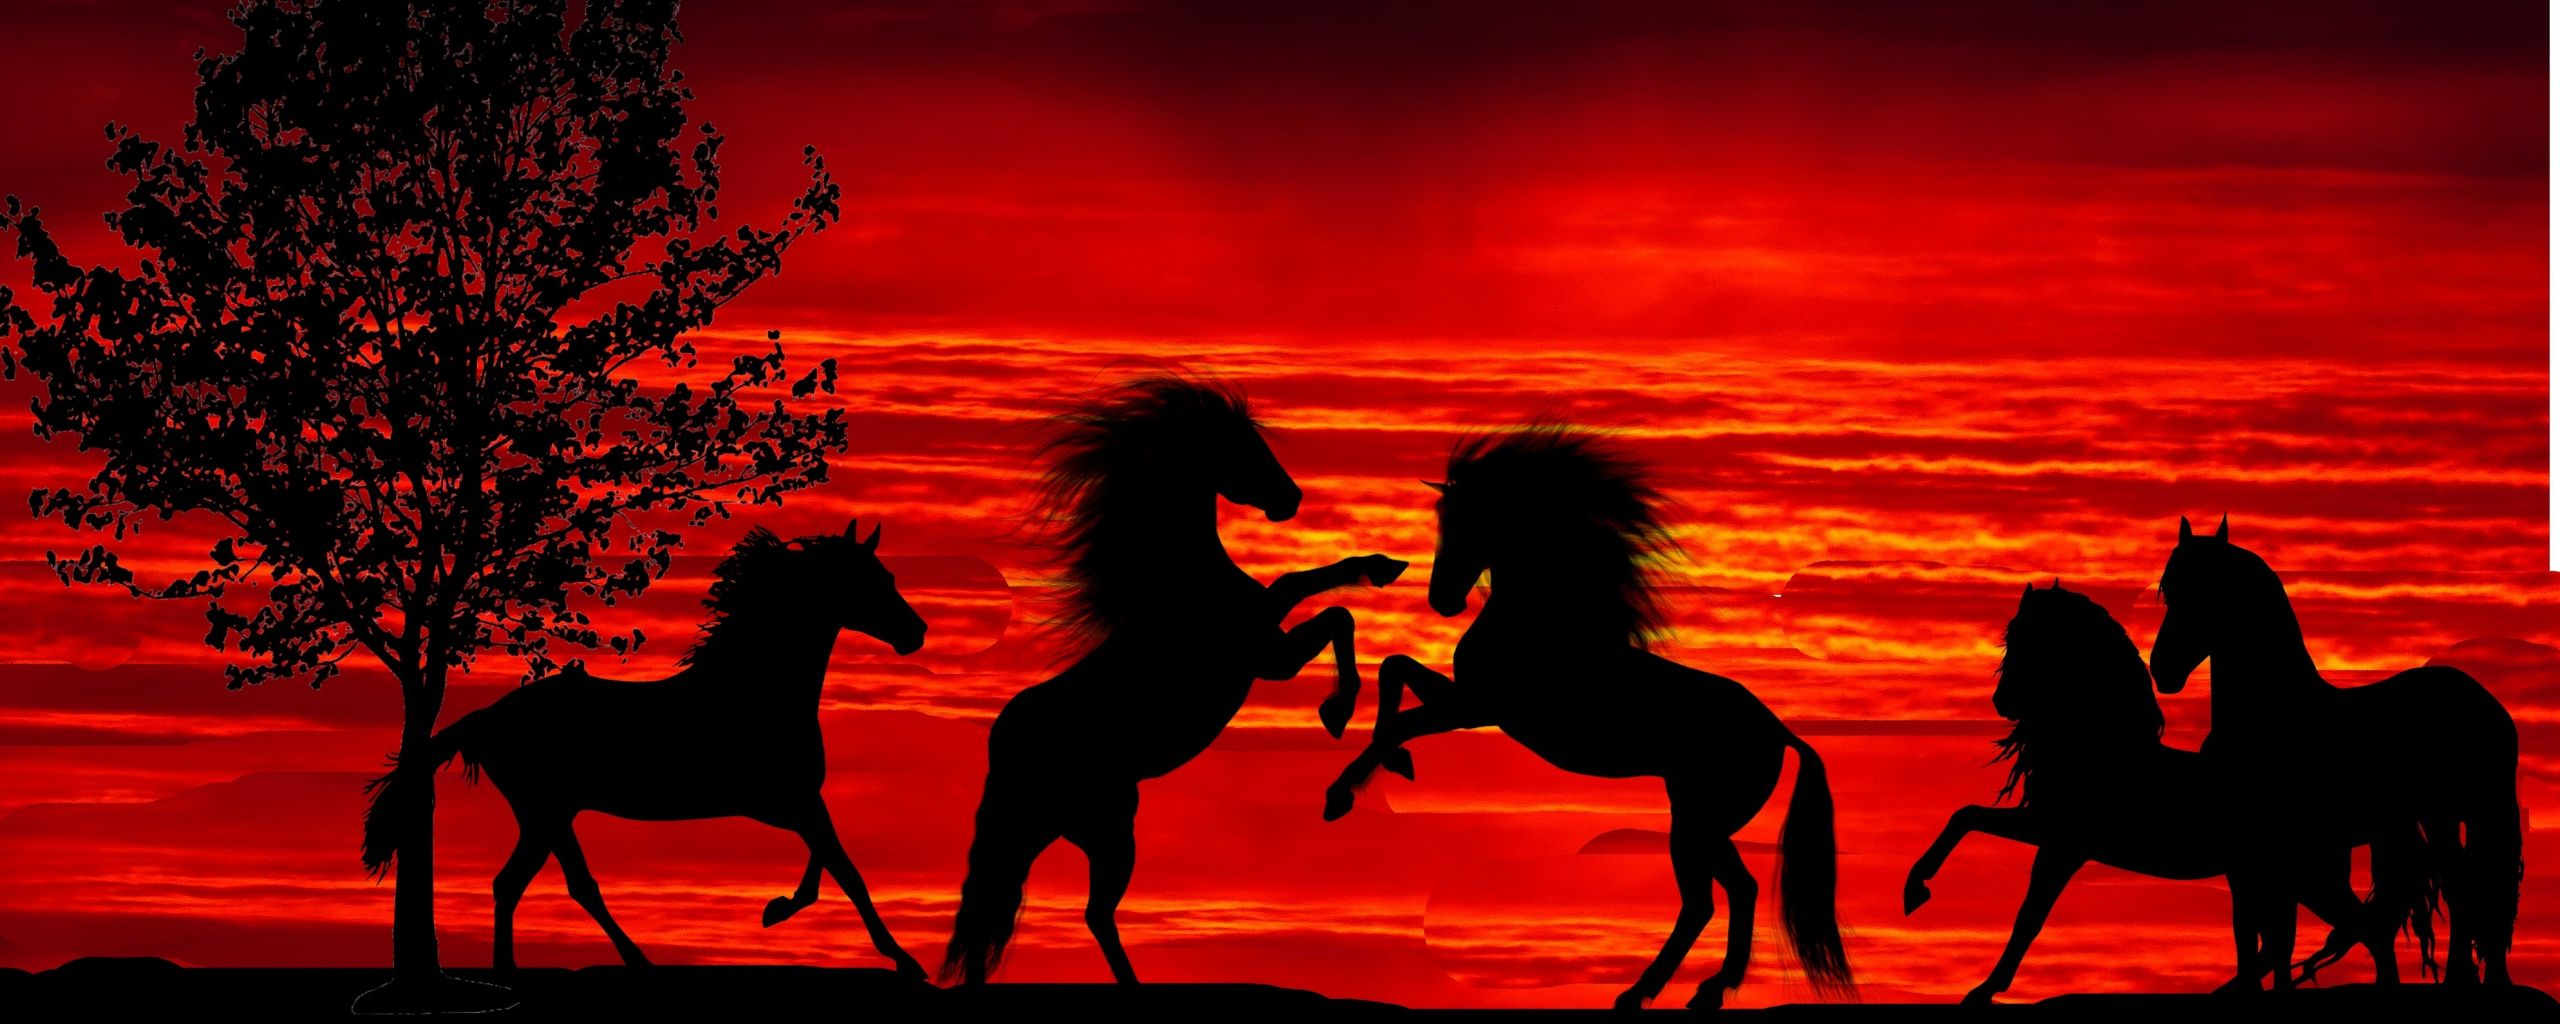 Download 2560x1024 wallpaper sunset, silhouette, horses, herd, dual wide, wide 21: widescreen, 2560x1024 HD image, background, 15521